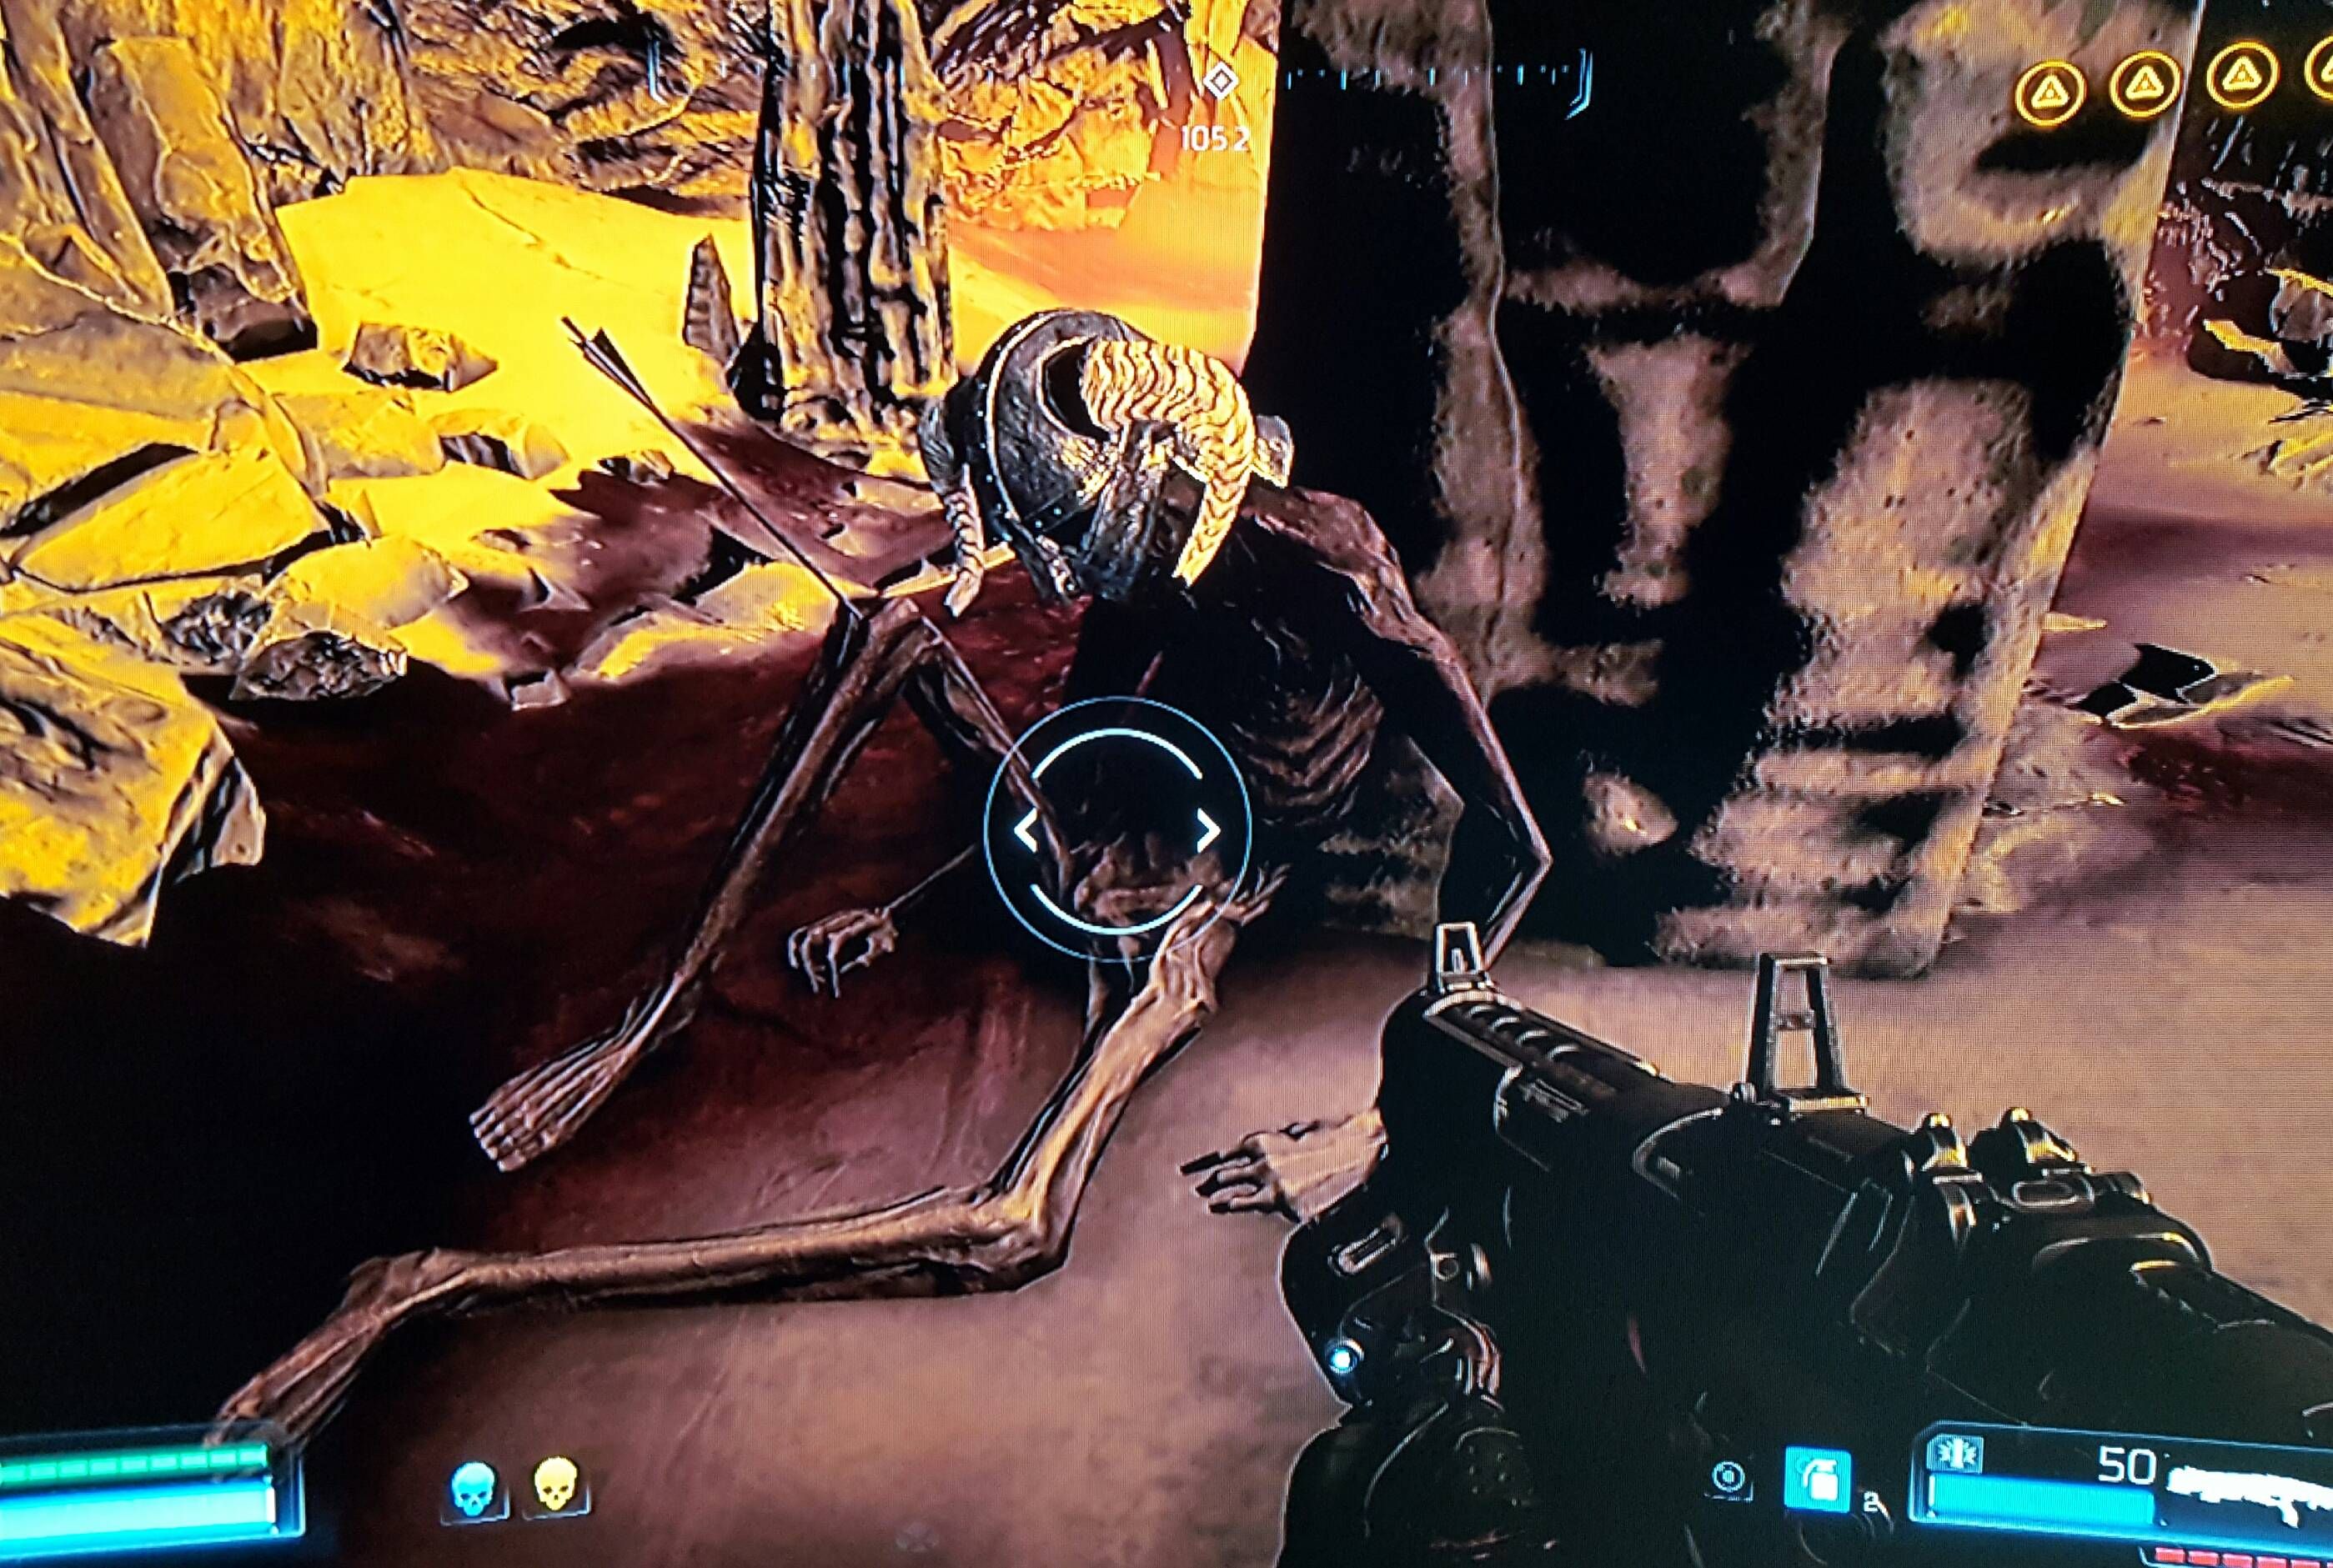 While playing DOOM i found this fellow wearing an iron helmet from Skyrim, and yes that is an arrow in his knee.